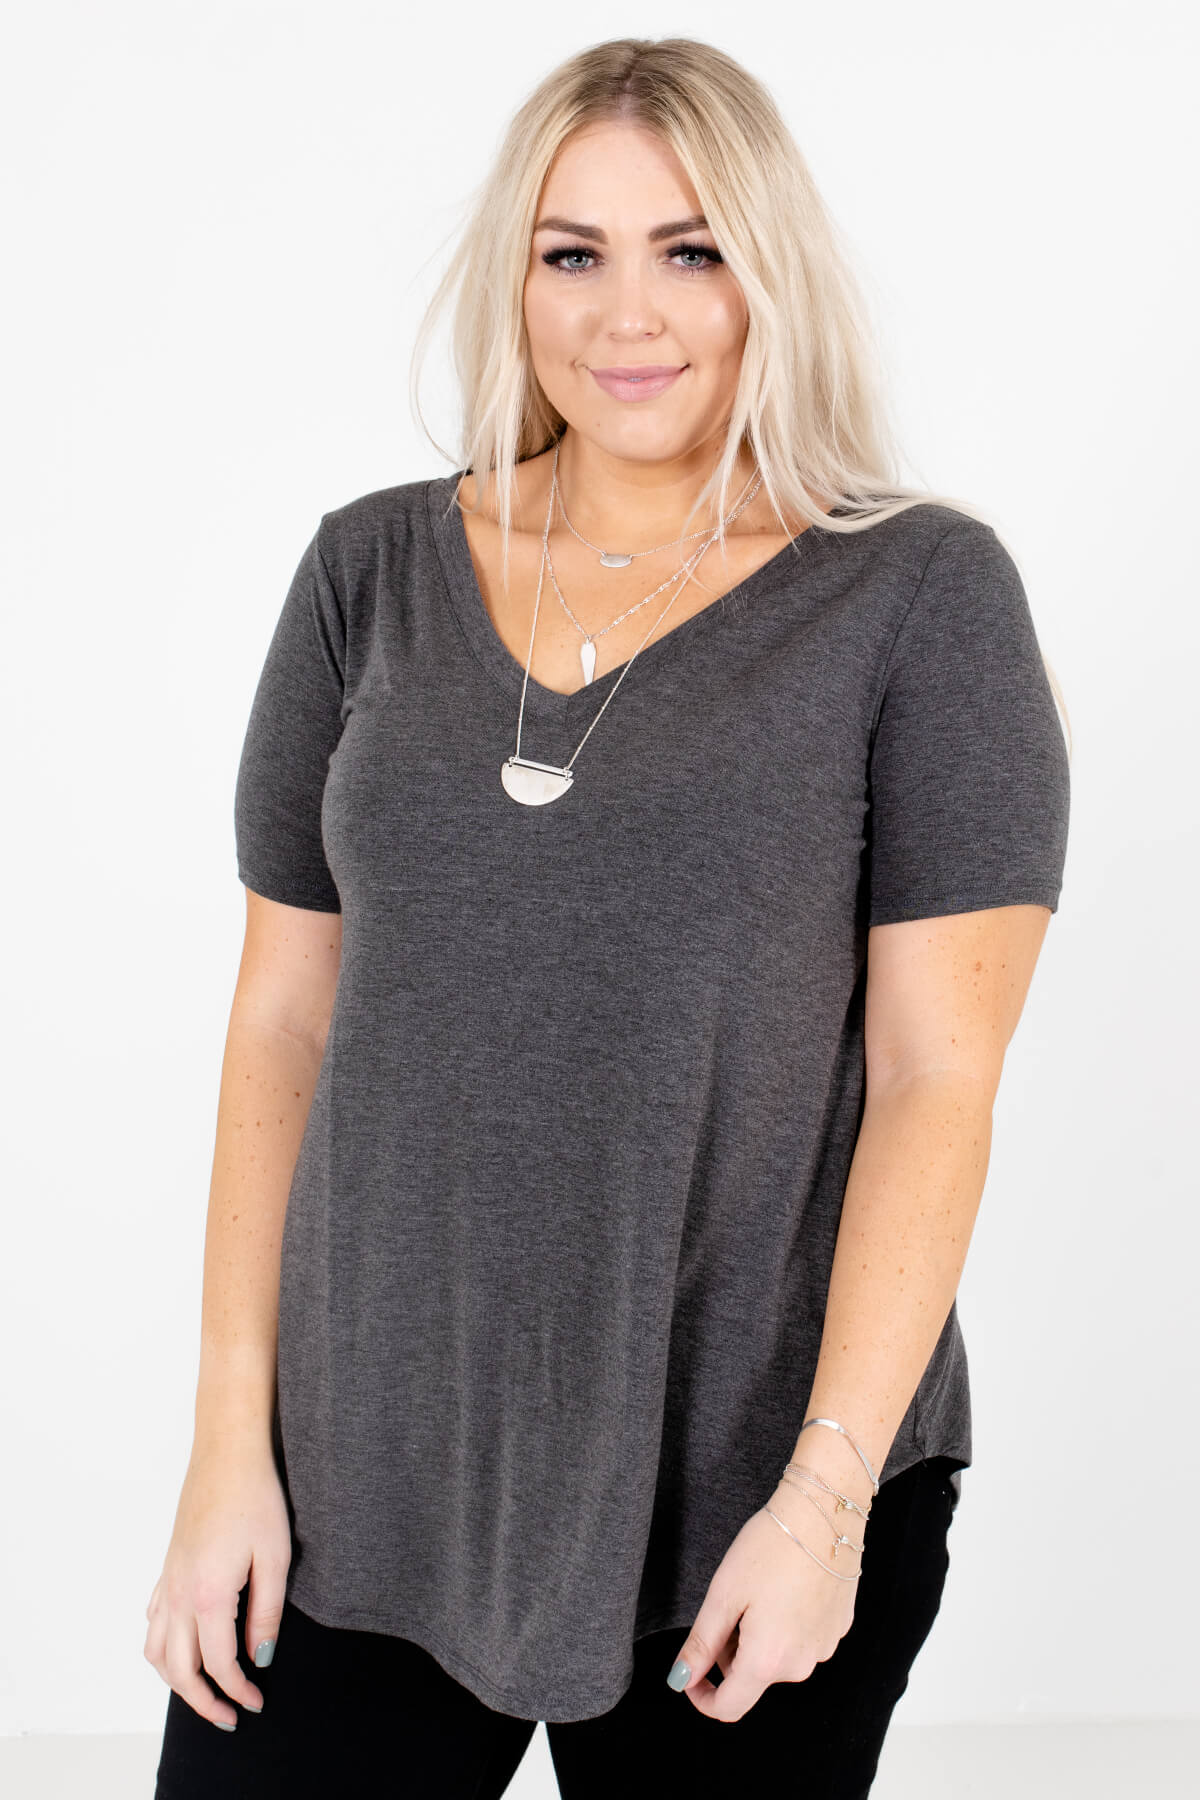 Charcoal Gray Lightweight Material Boutique Tops for Women